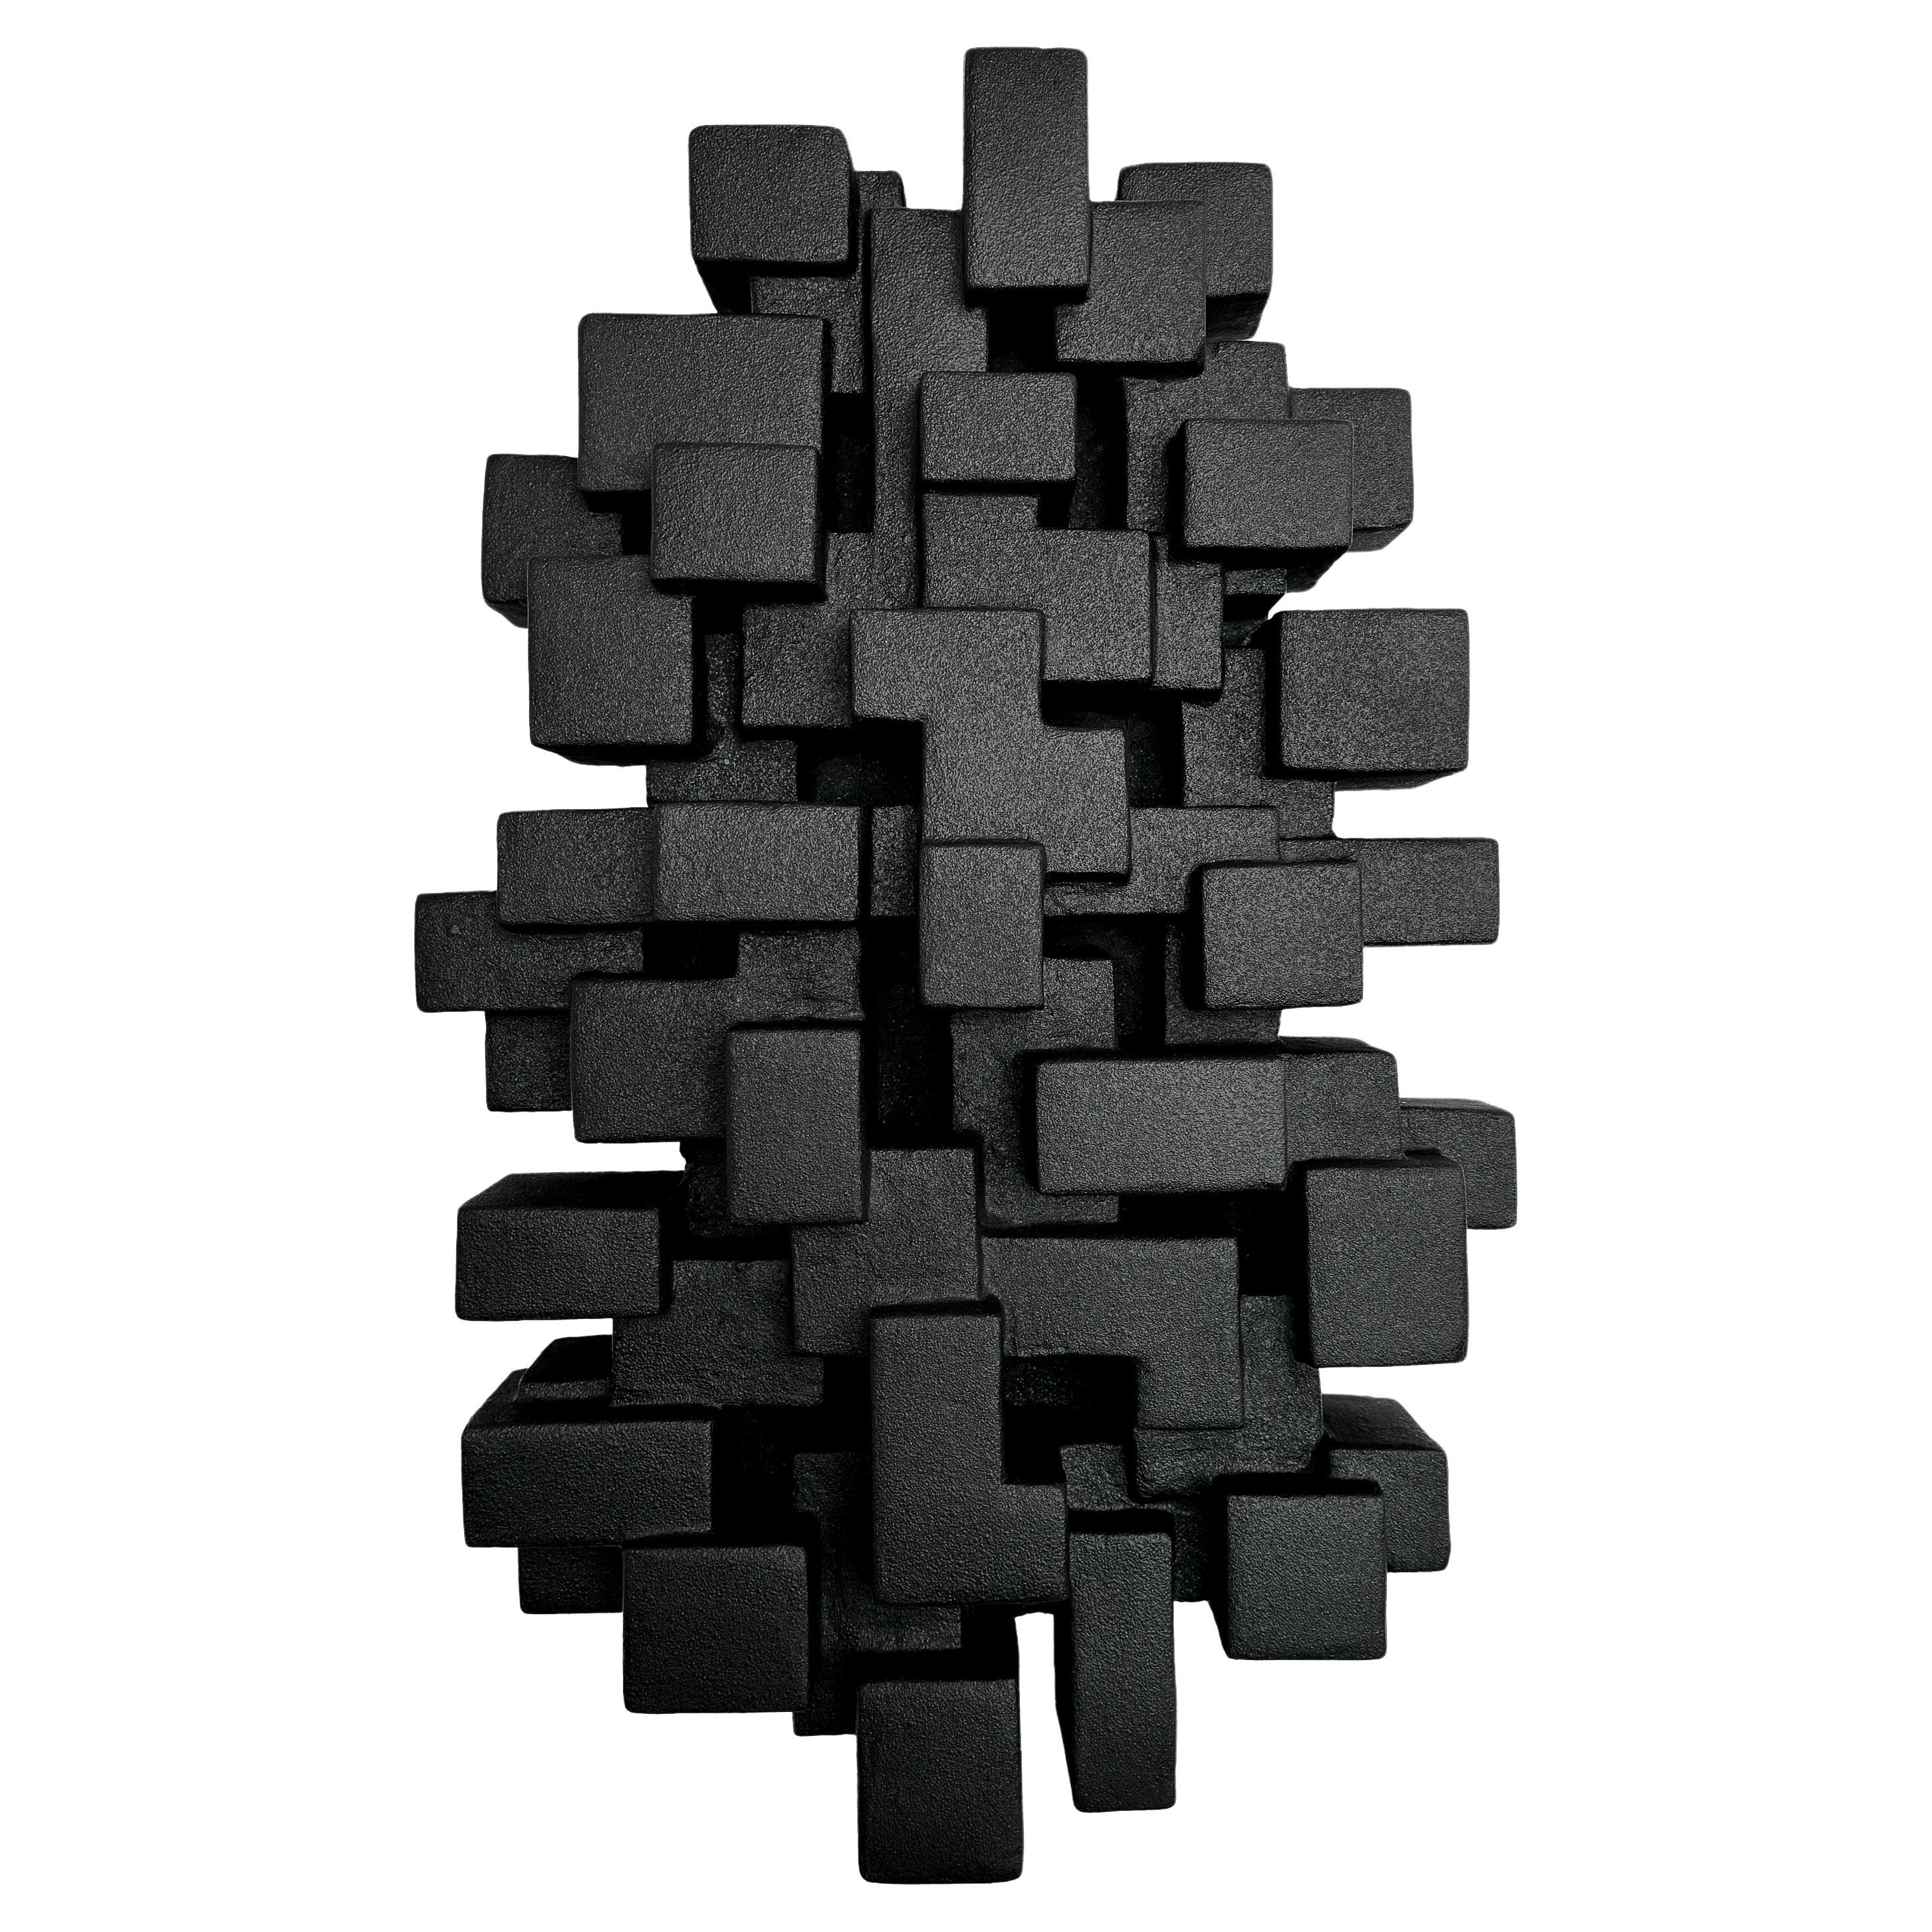 "Composition 20.1" Geometric Abstract Wall Sculpture by Dan Schneiger For Sale